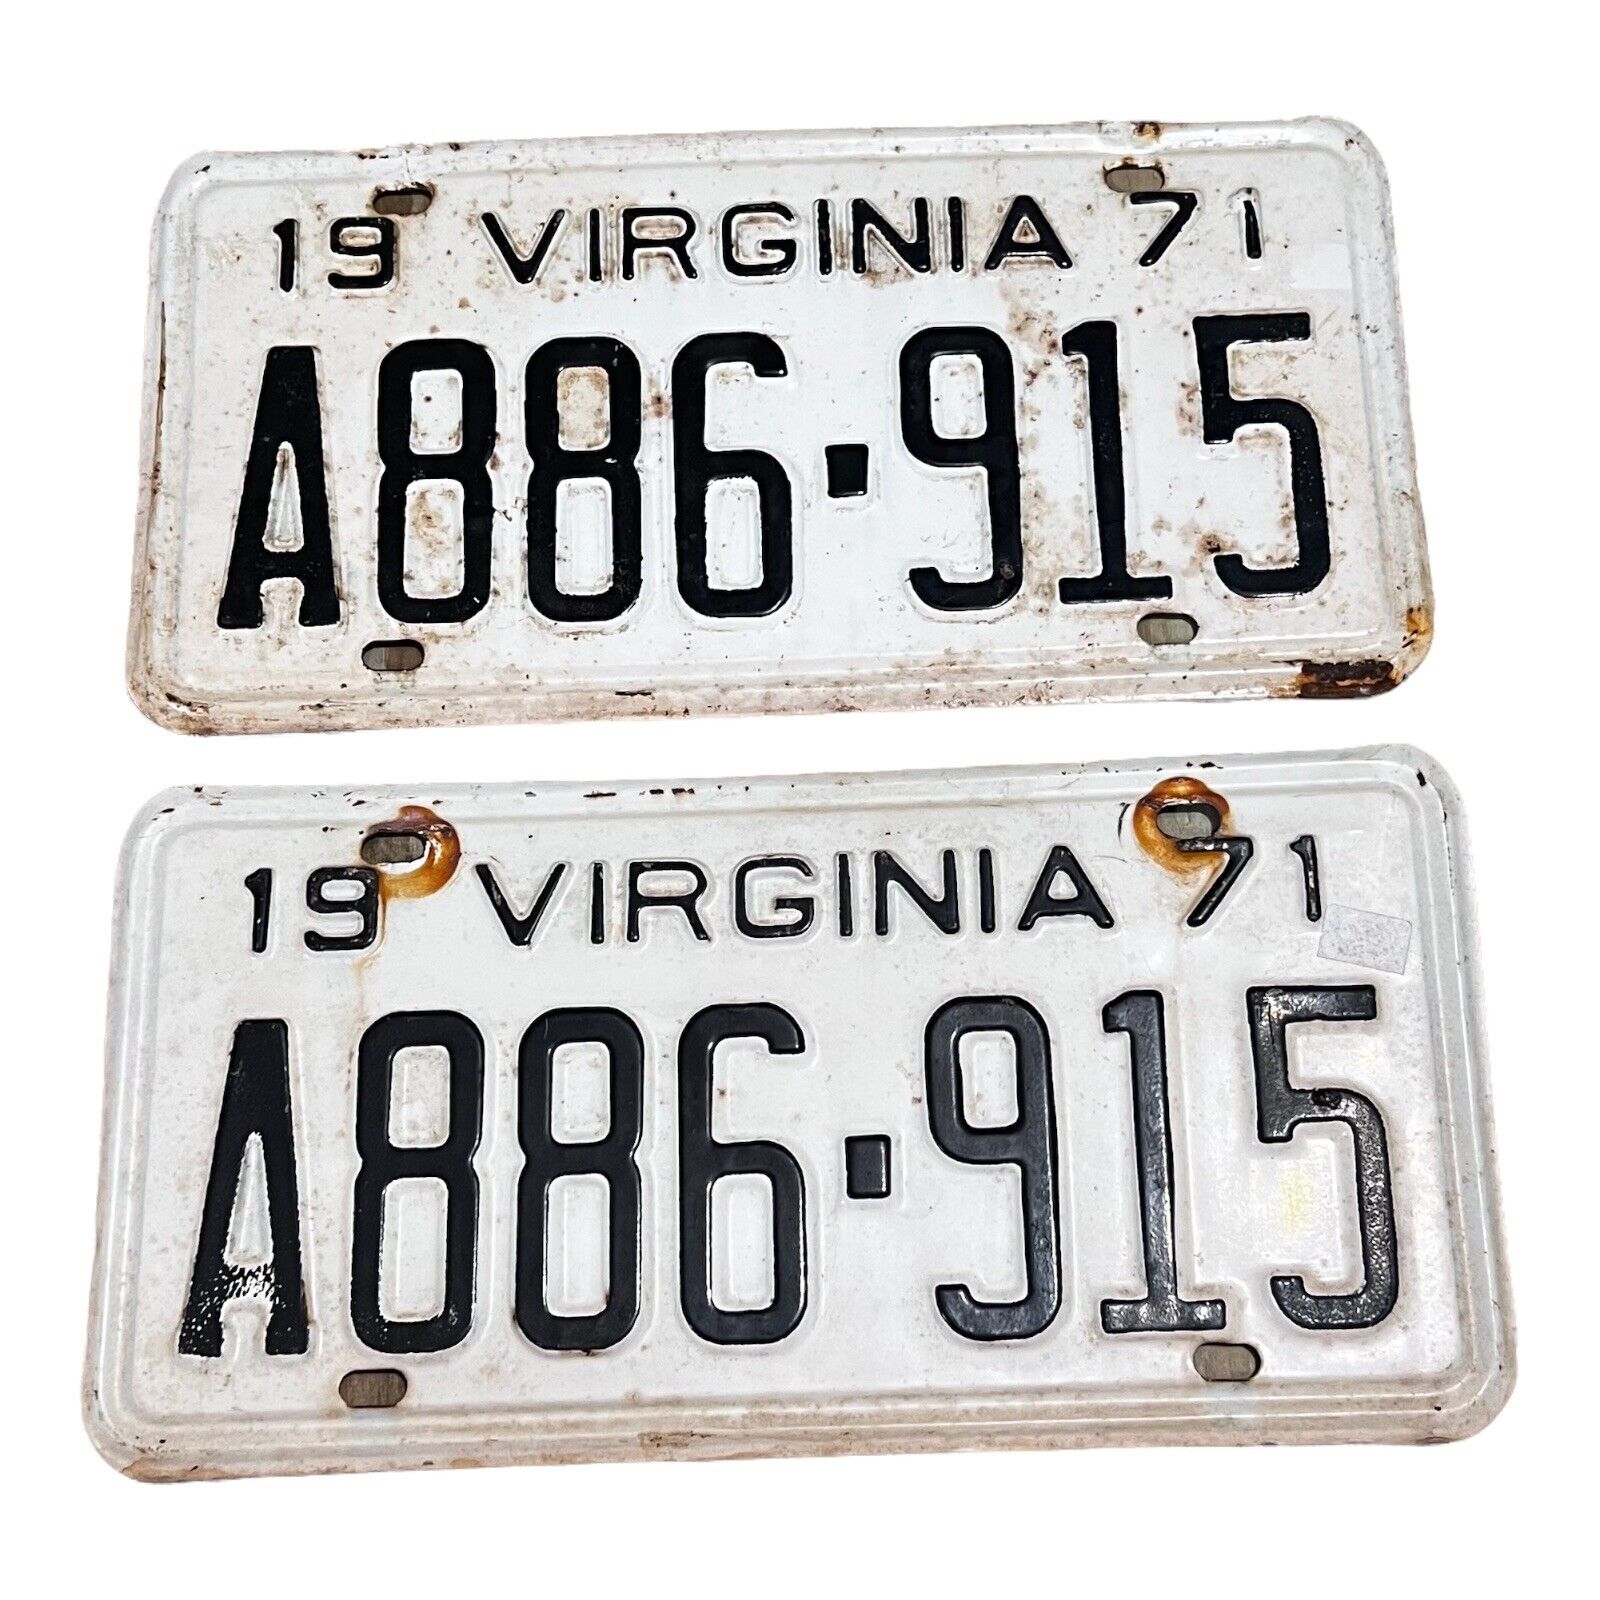 Vintage 1971 Virginia Collectible License Plate Set Of Two Matching A886 915 